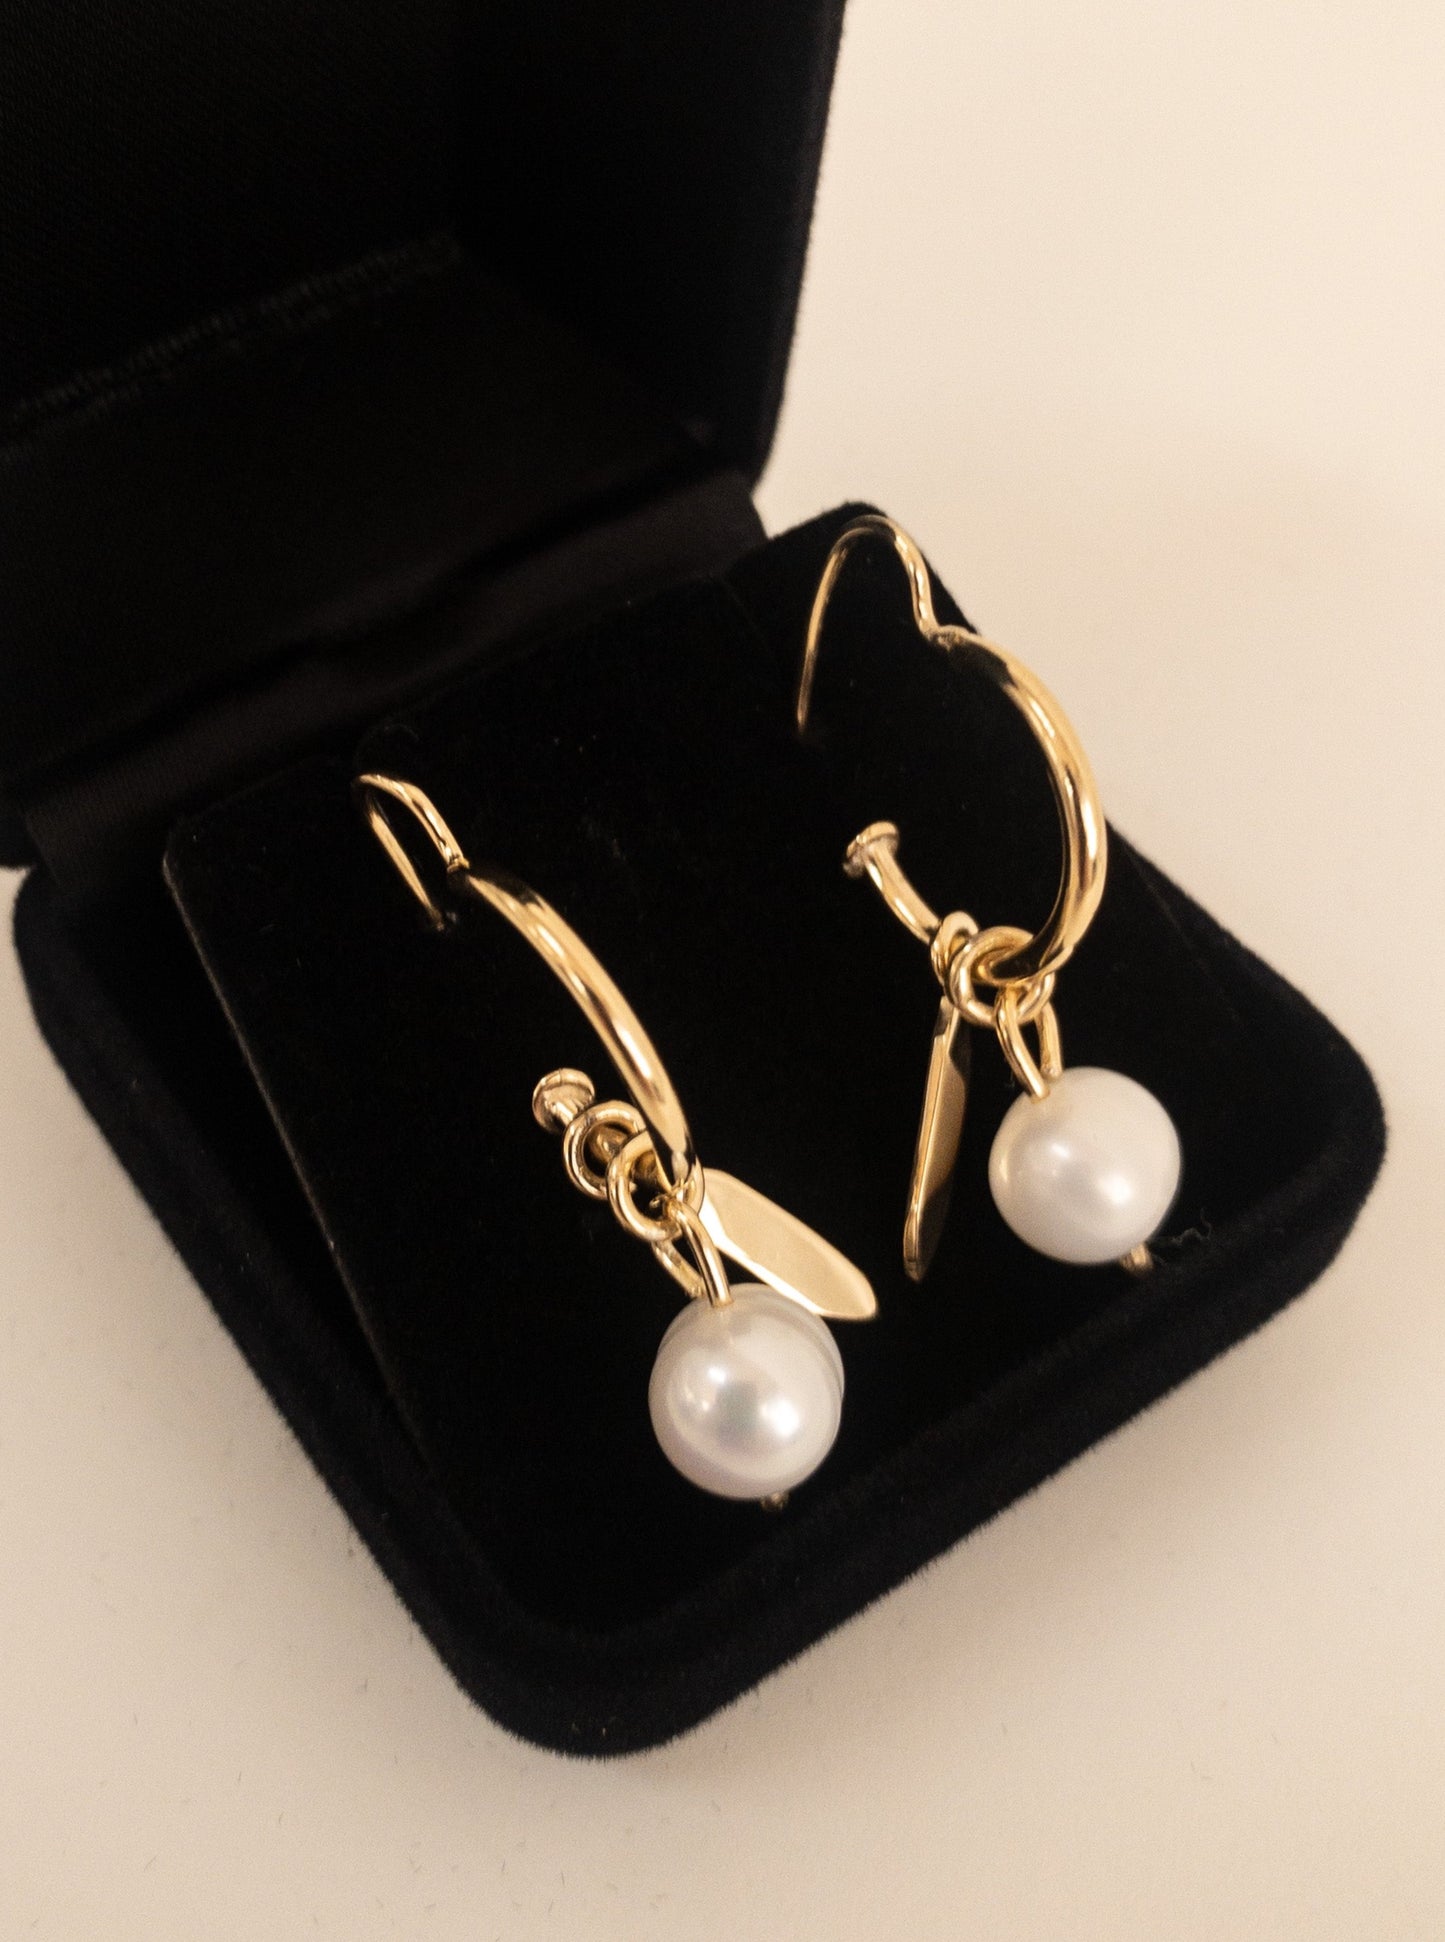 hoop earrings with charms.Sterling Silver: Crafted from high-quality 925 sterling silver. 8mm A-Grade Round Freshwater Pearl: The centre piece of these hoops, adding an element of timeless elegance.